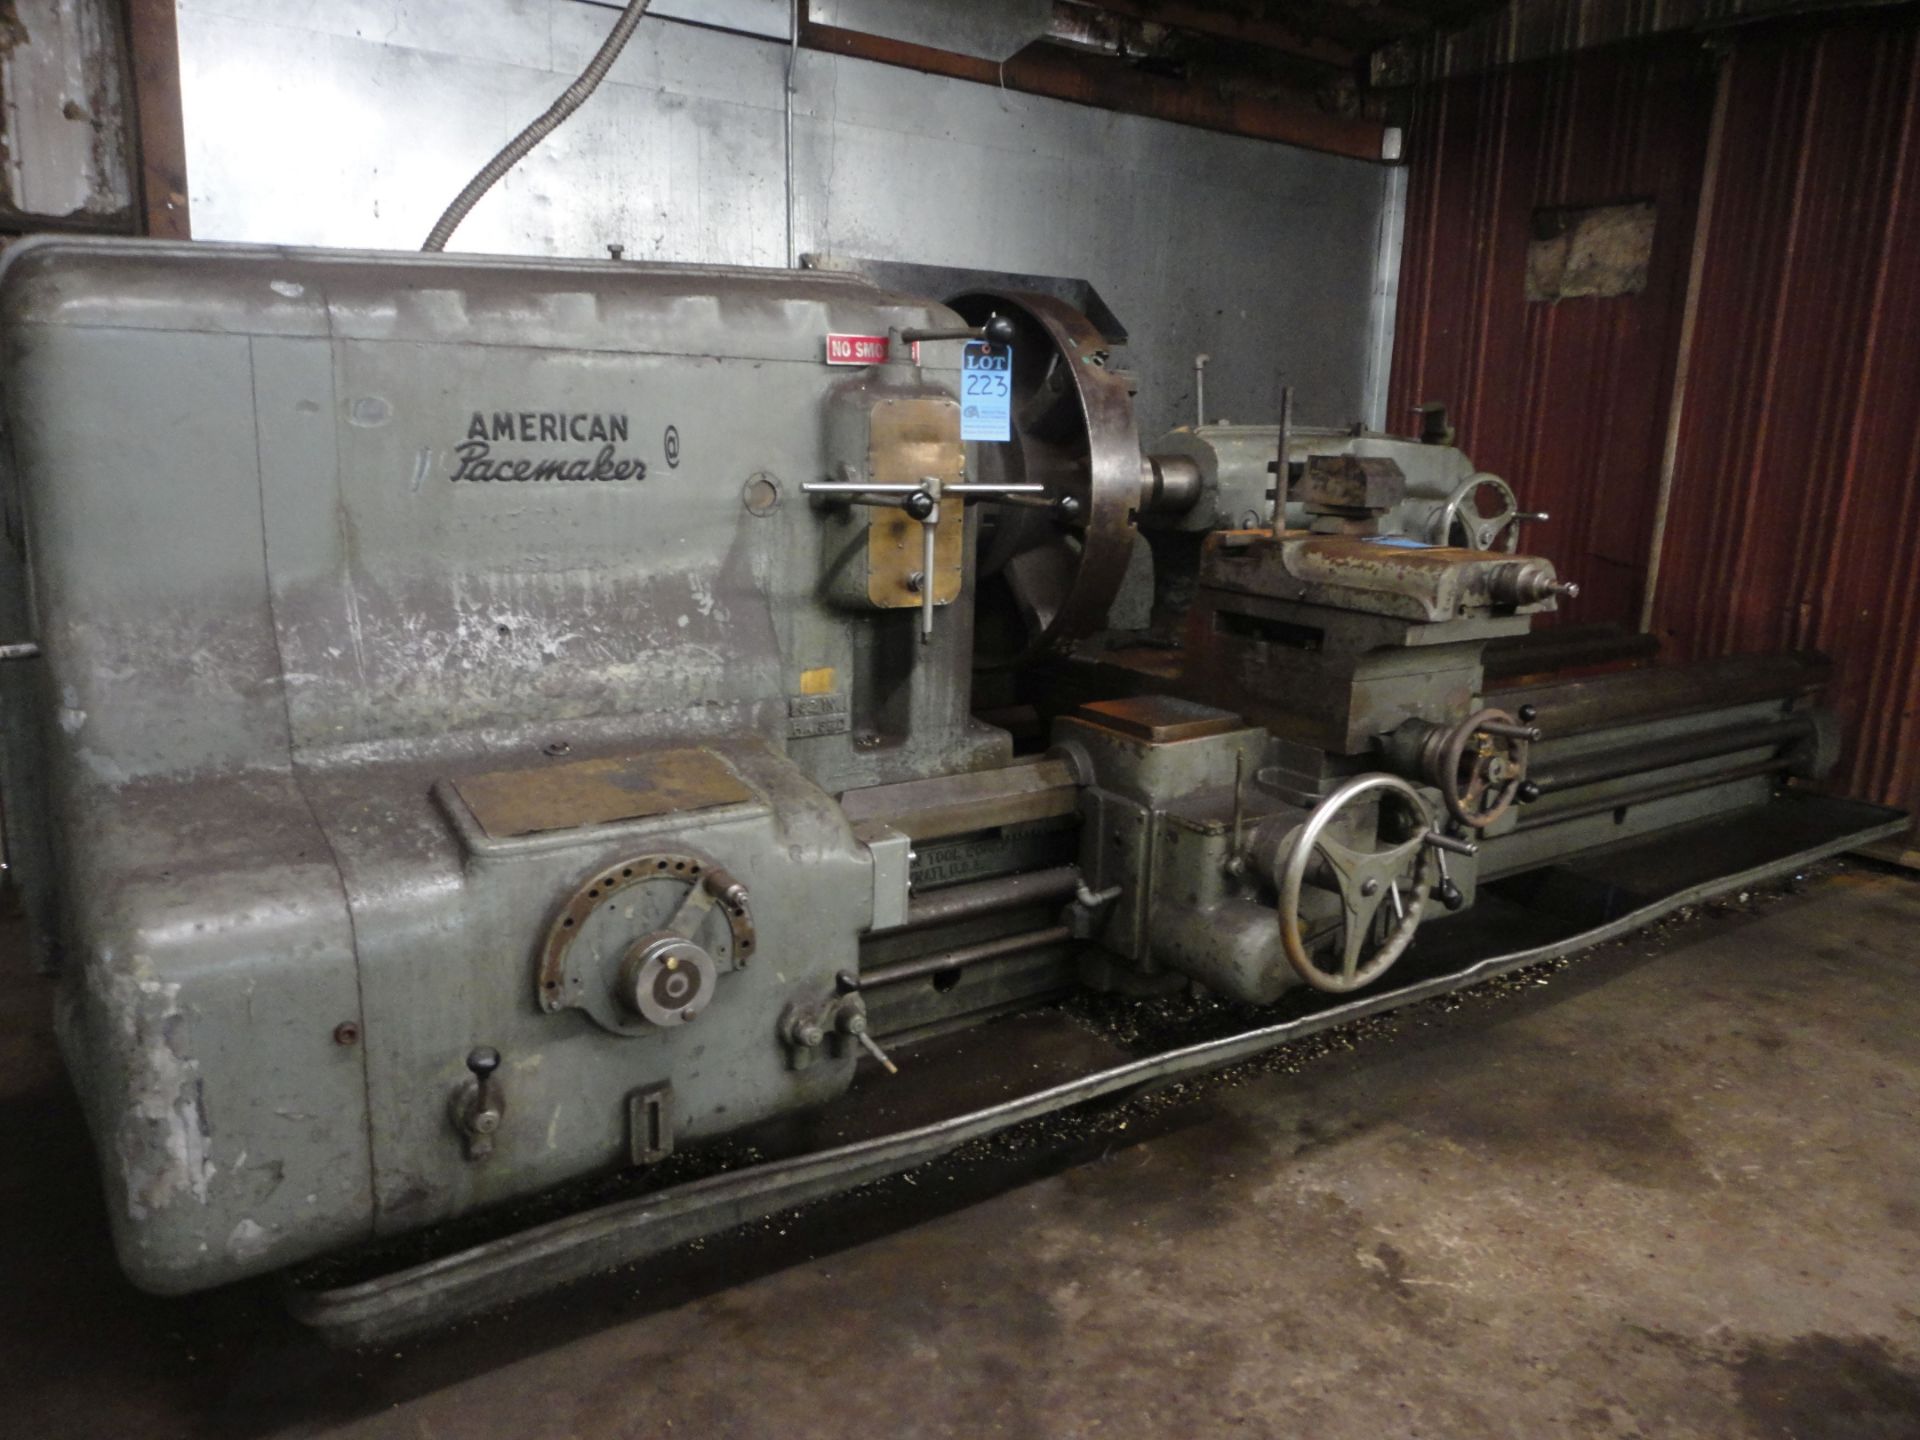 46" X 84" AMERICAN PACEMAKER ENGINE LATHE; S/N N/A, 46" SWING OVER BED, 30" SWING OVER CROSS